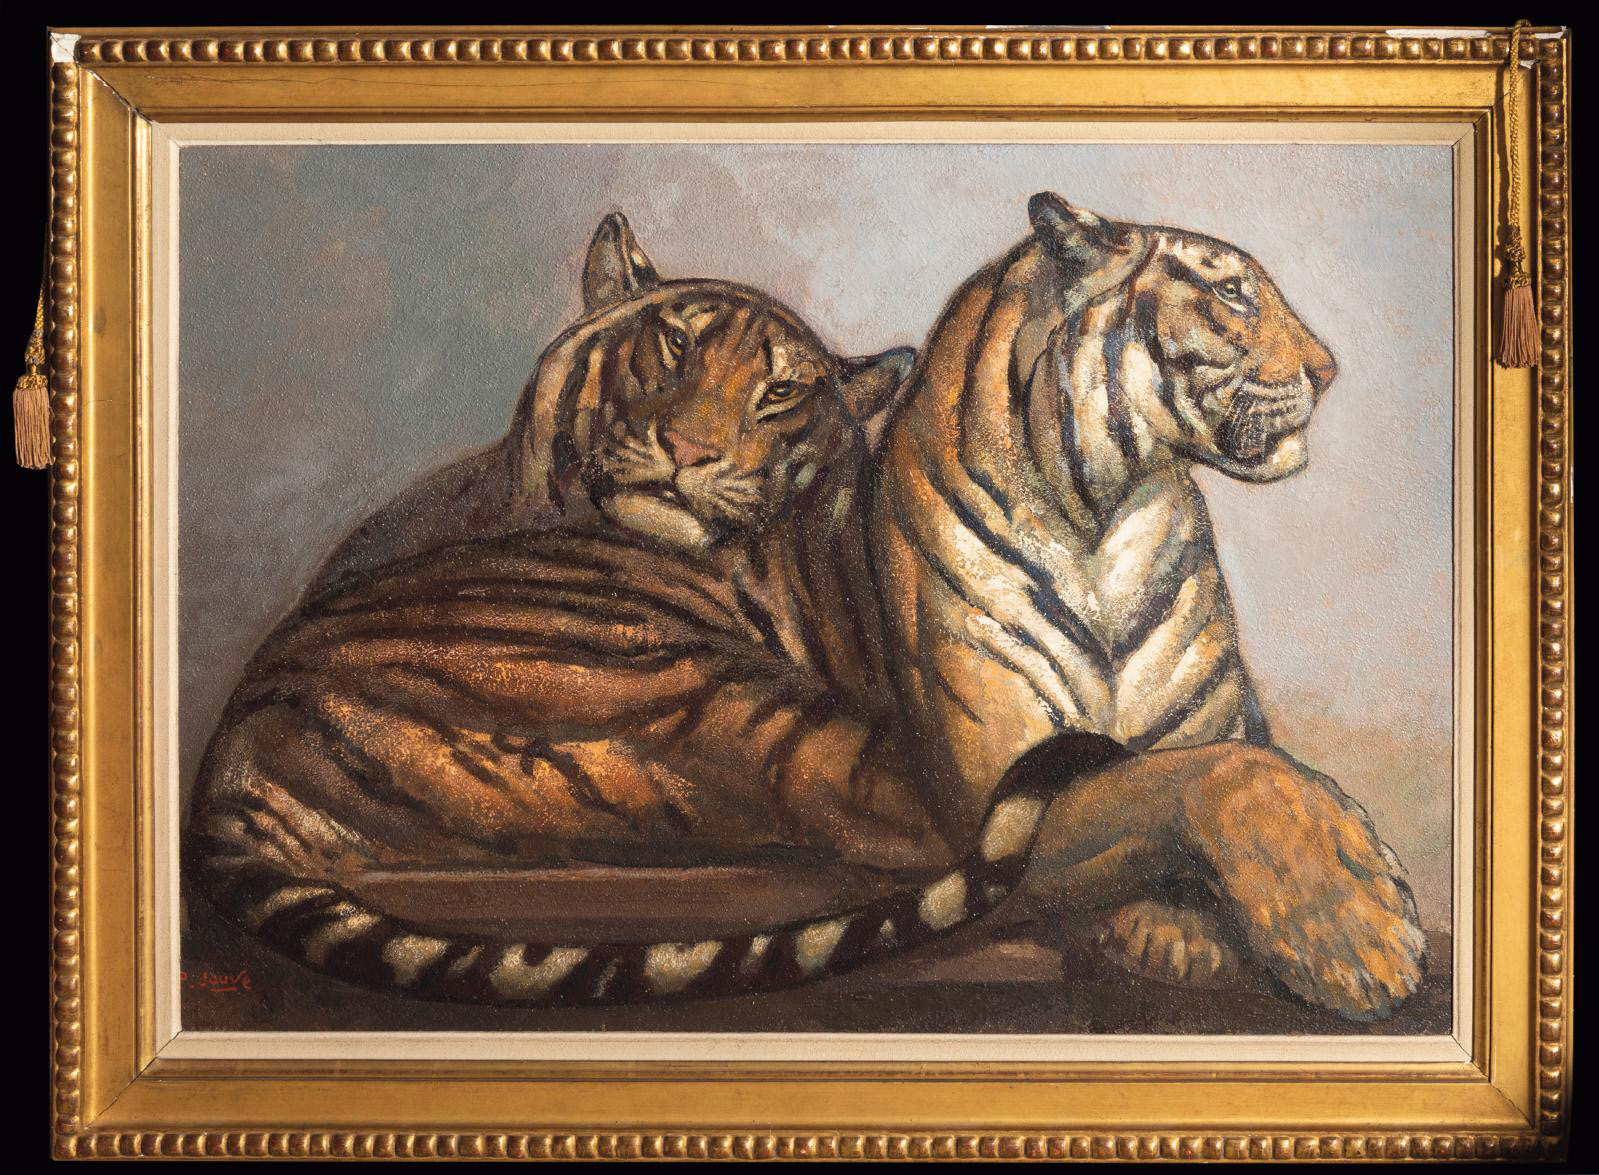 The Allure of Paul Jouve’s Tigers